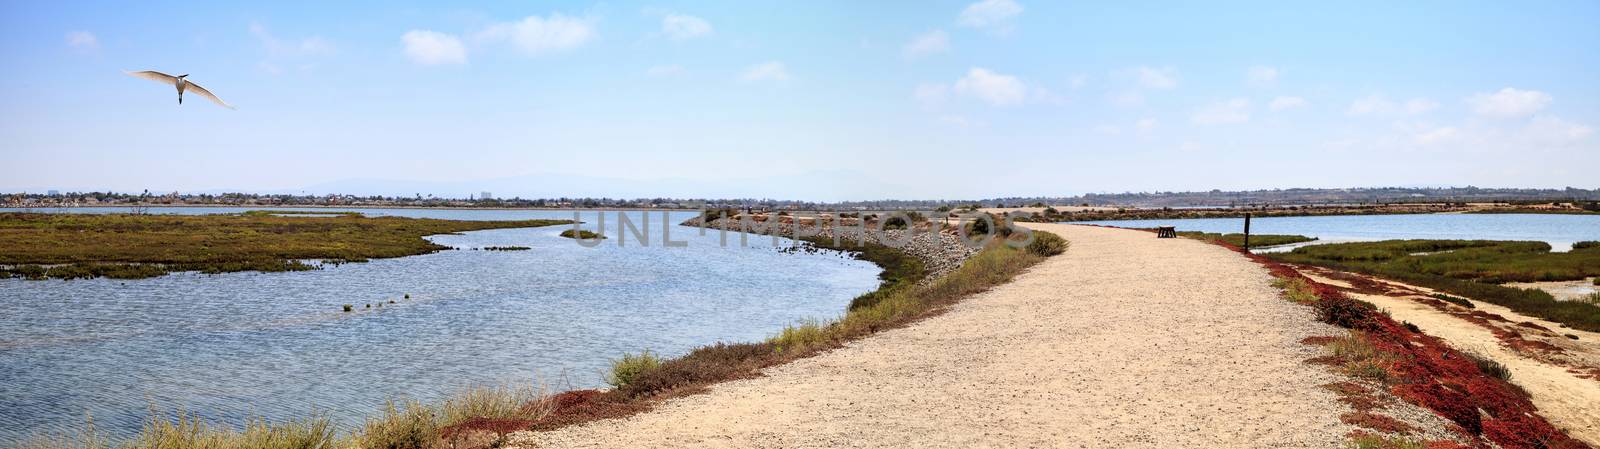 Path along the peaceful and tranquil marsh of Bolsa Chica wetlan by steffstarr